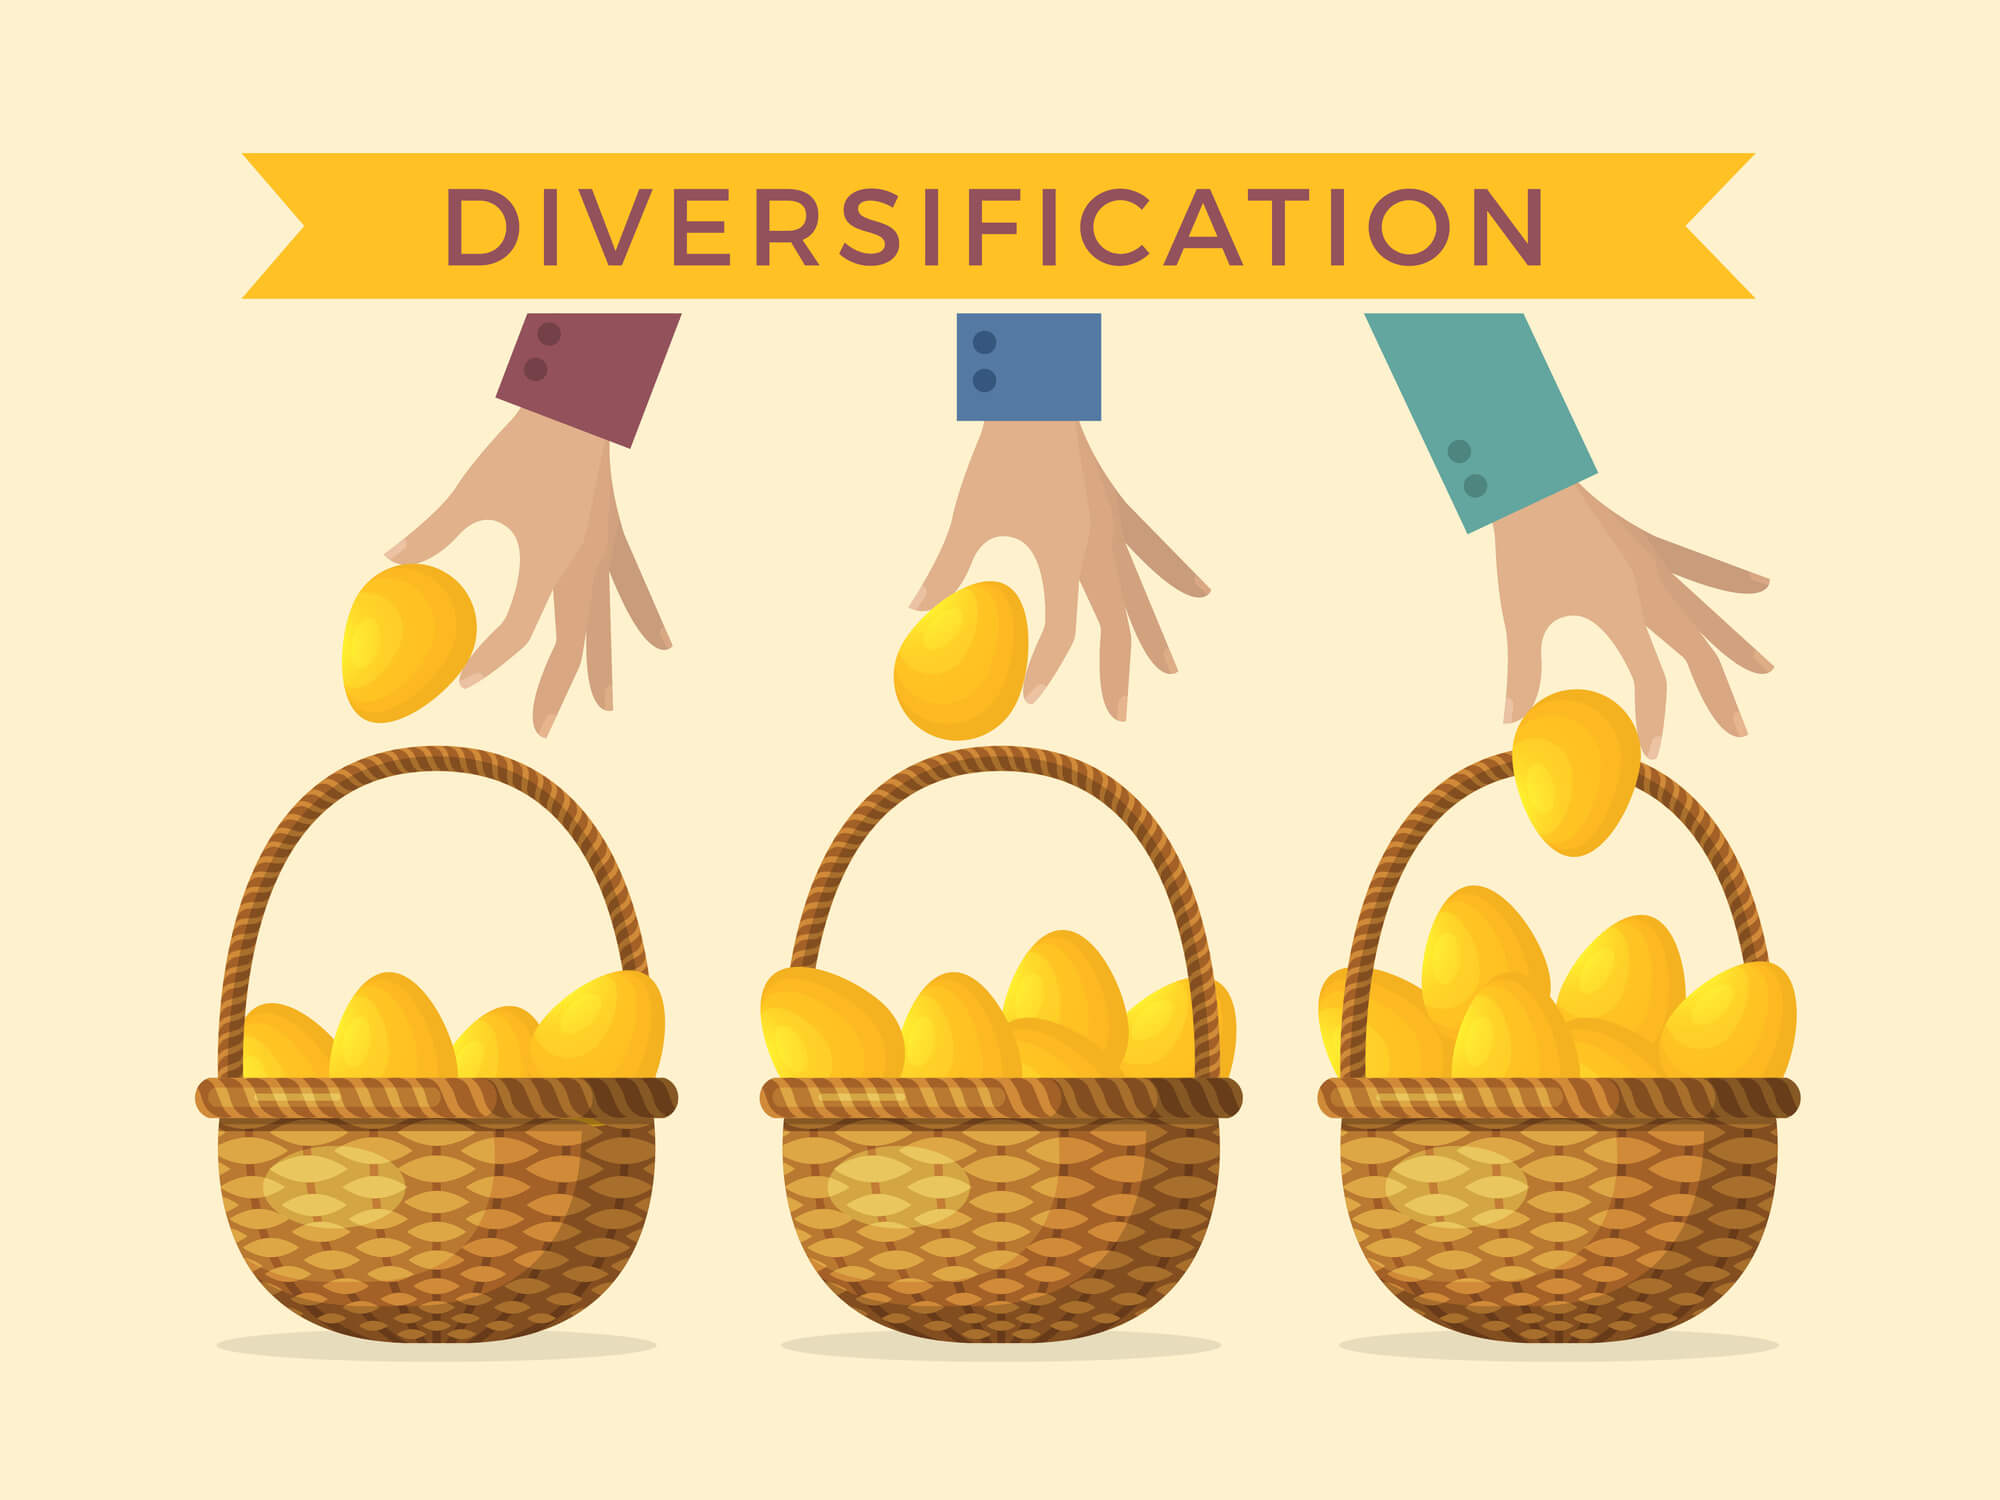 What is Diversification - Complete Controller